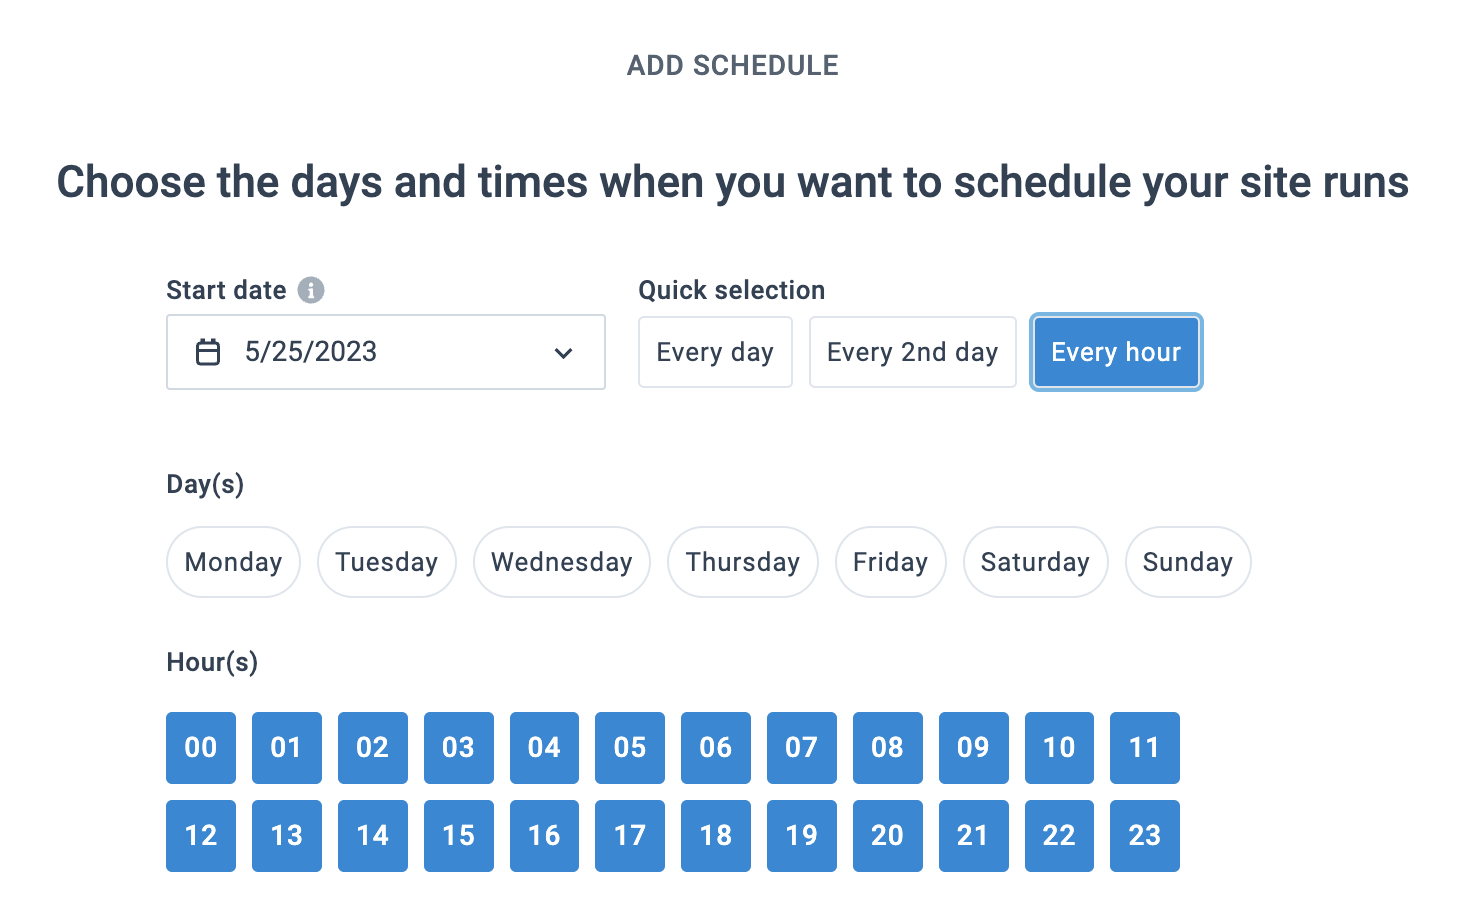 Schedule setup to run a site every 15 minutes (4 schedules required)